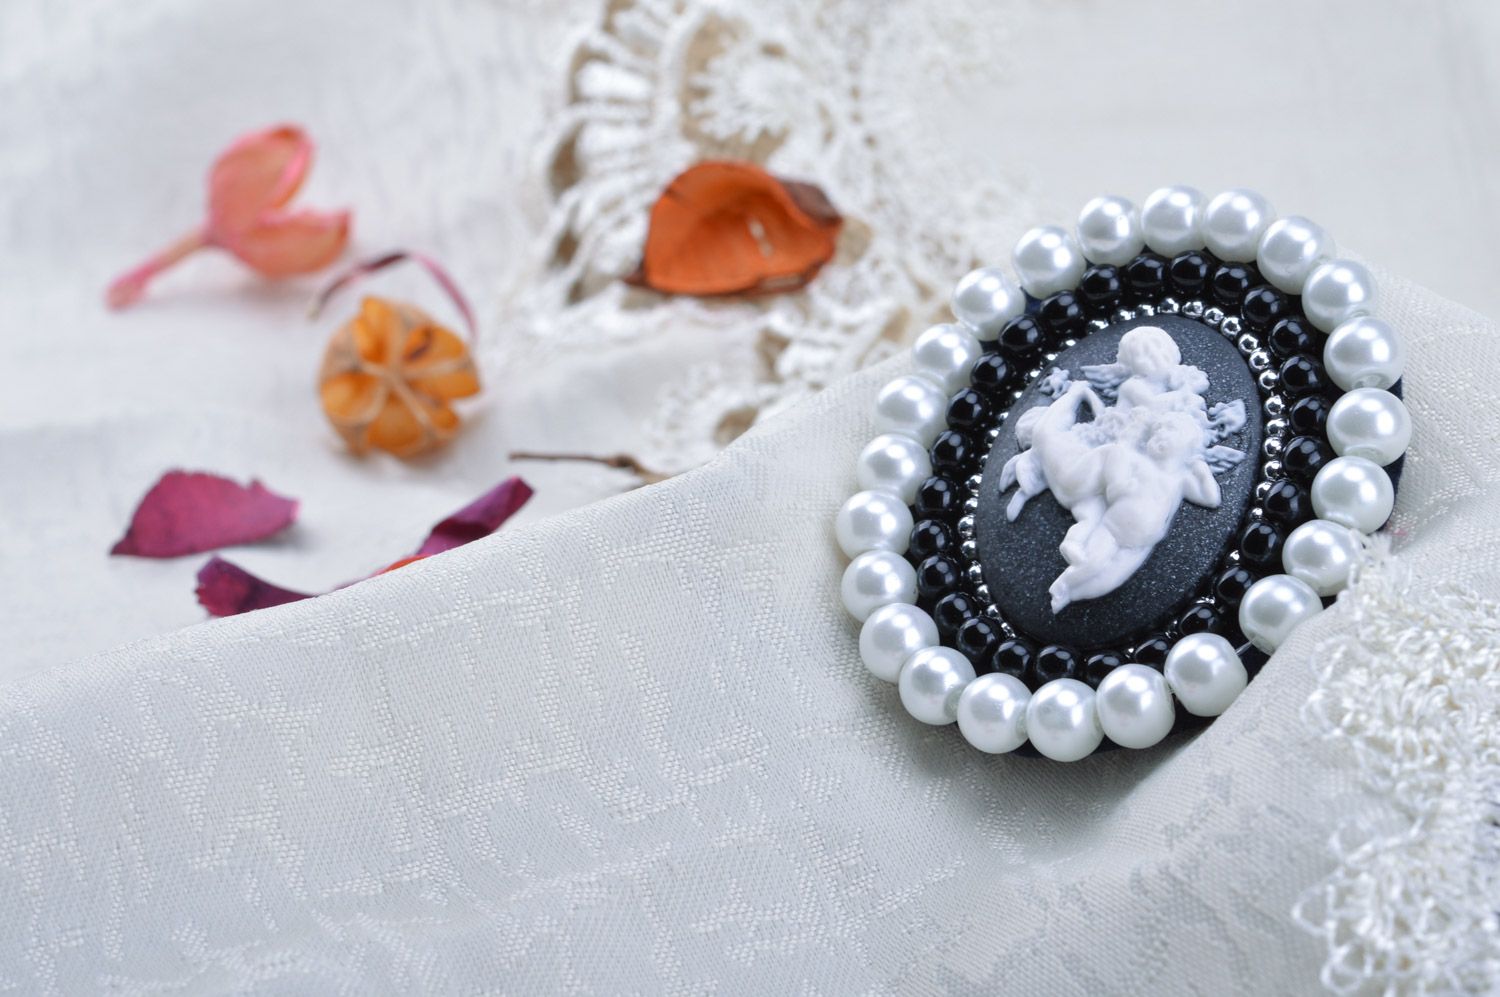 Handmade felt brooch with cameo embroidered with seed and pearl-like beads photo 4